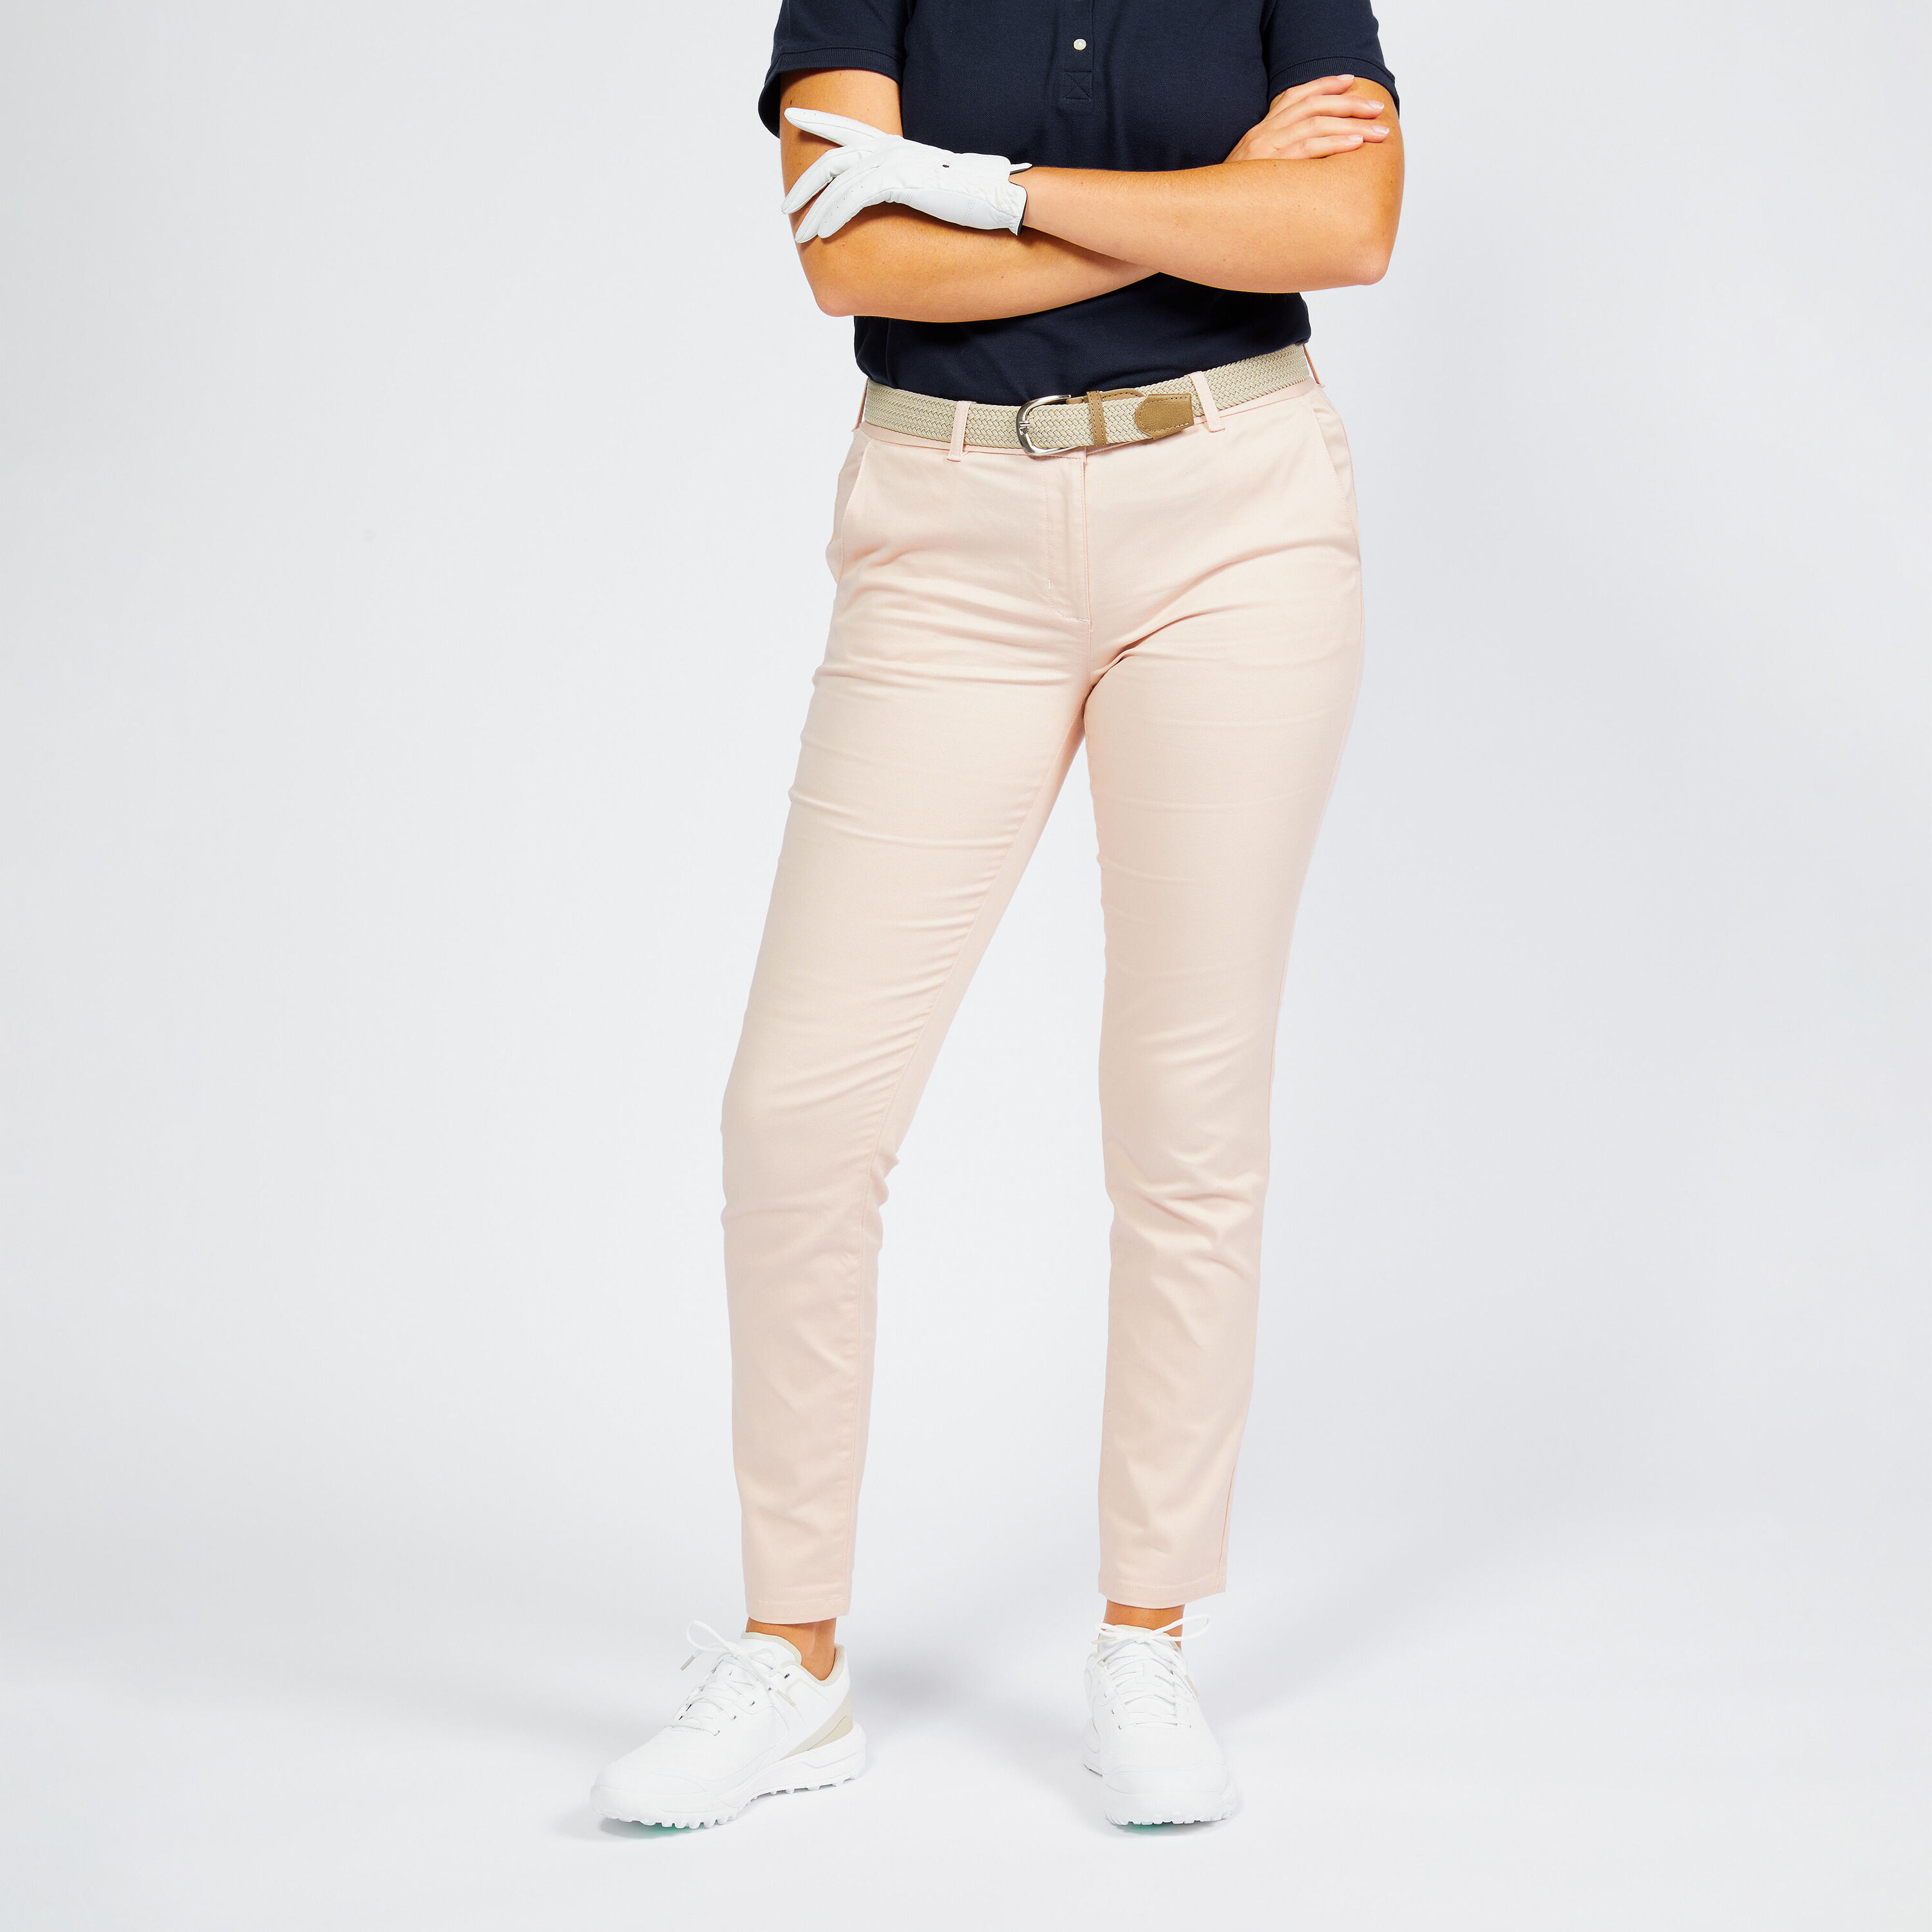 INESIS Women's Golf Trousers - MW500 pale pink